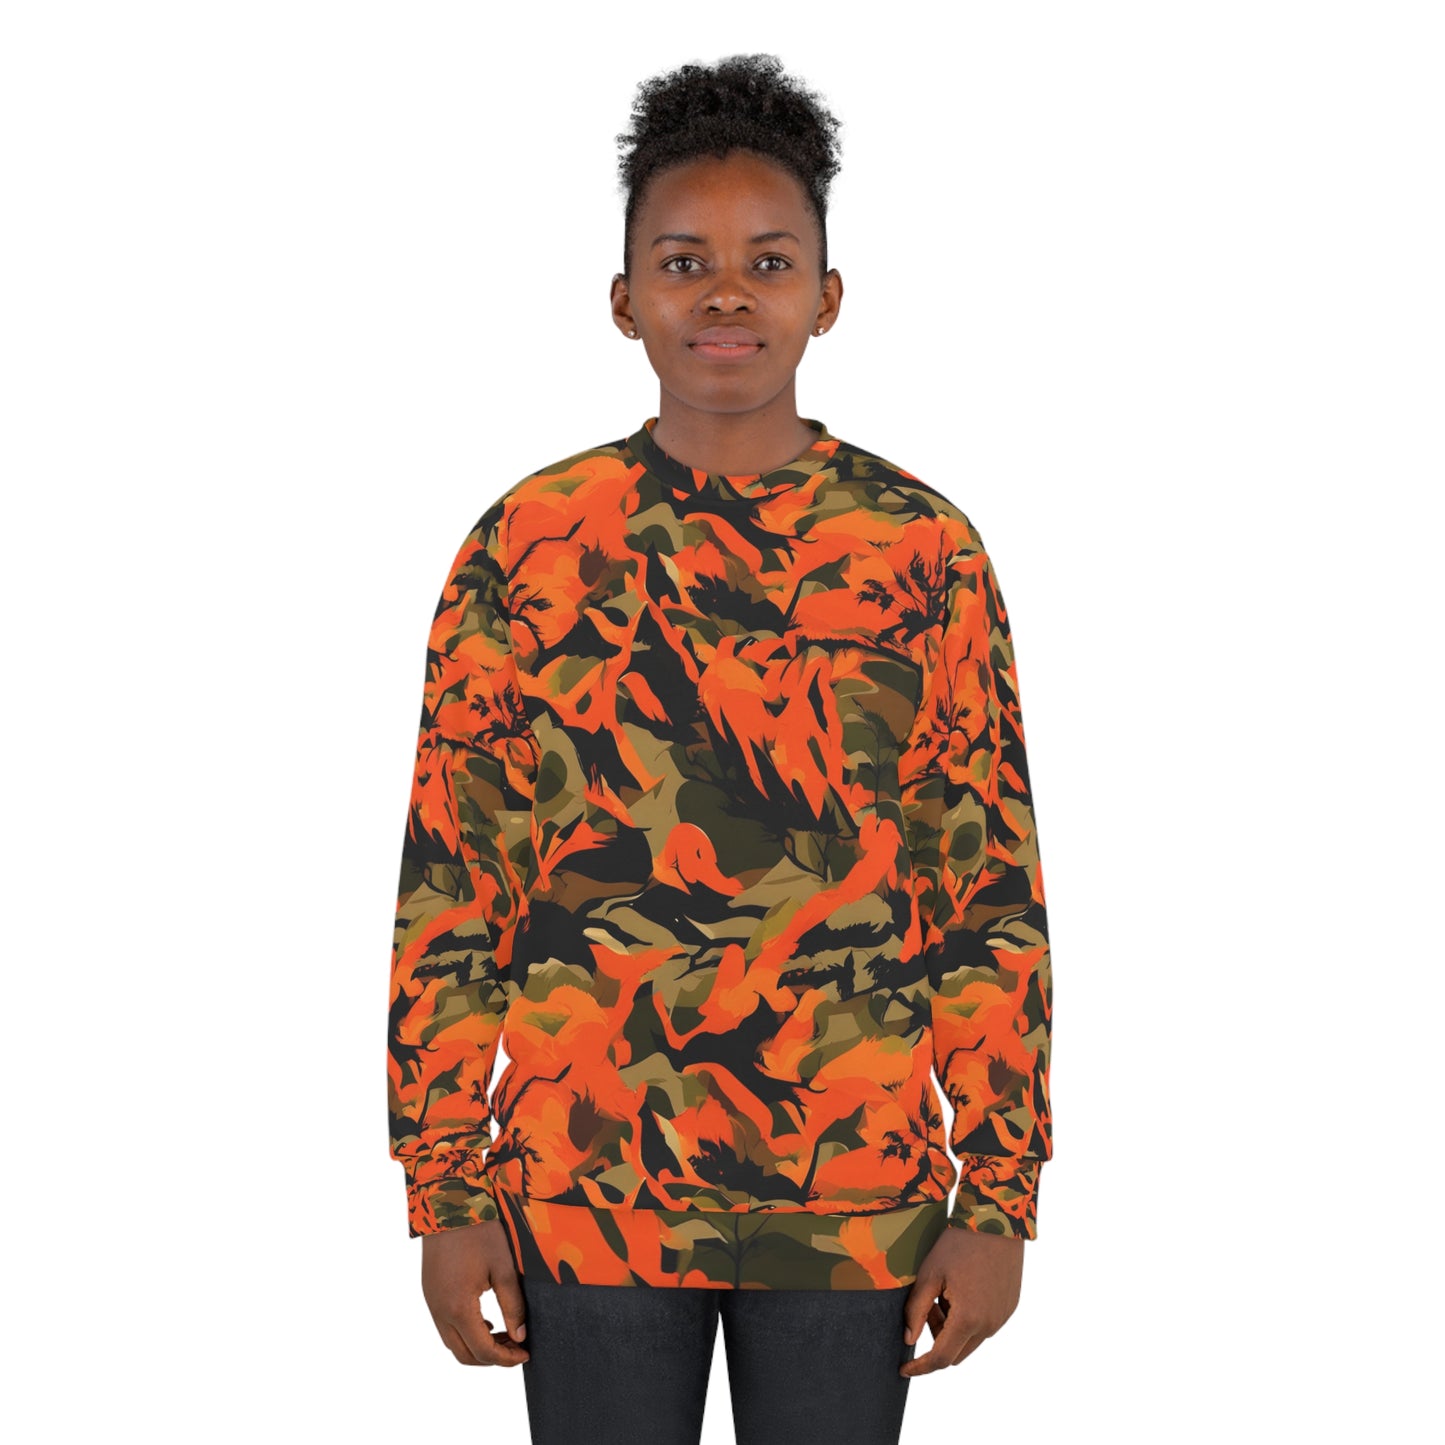 Hunting Camouflage Design with a Hint of Orange and Red Fire